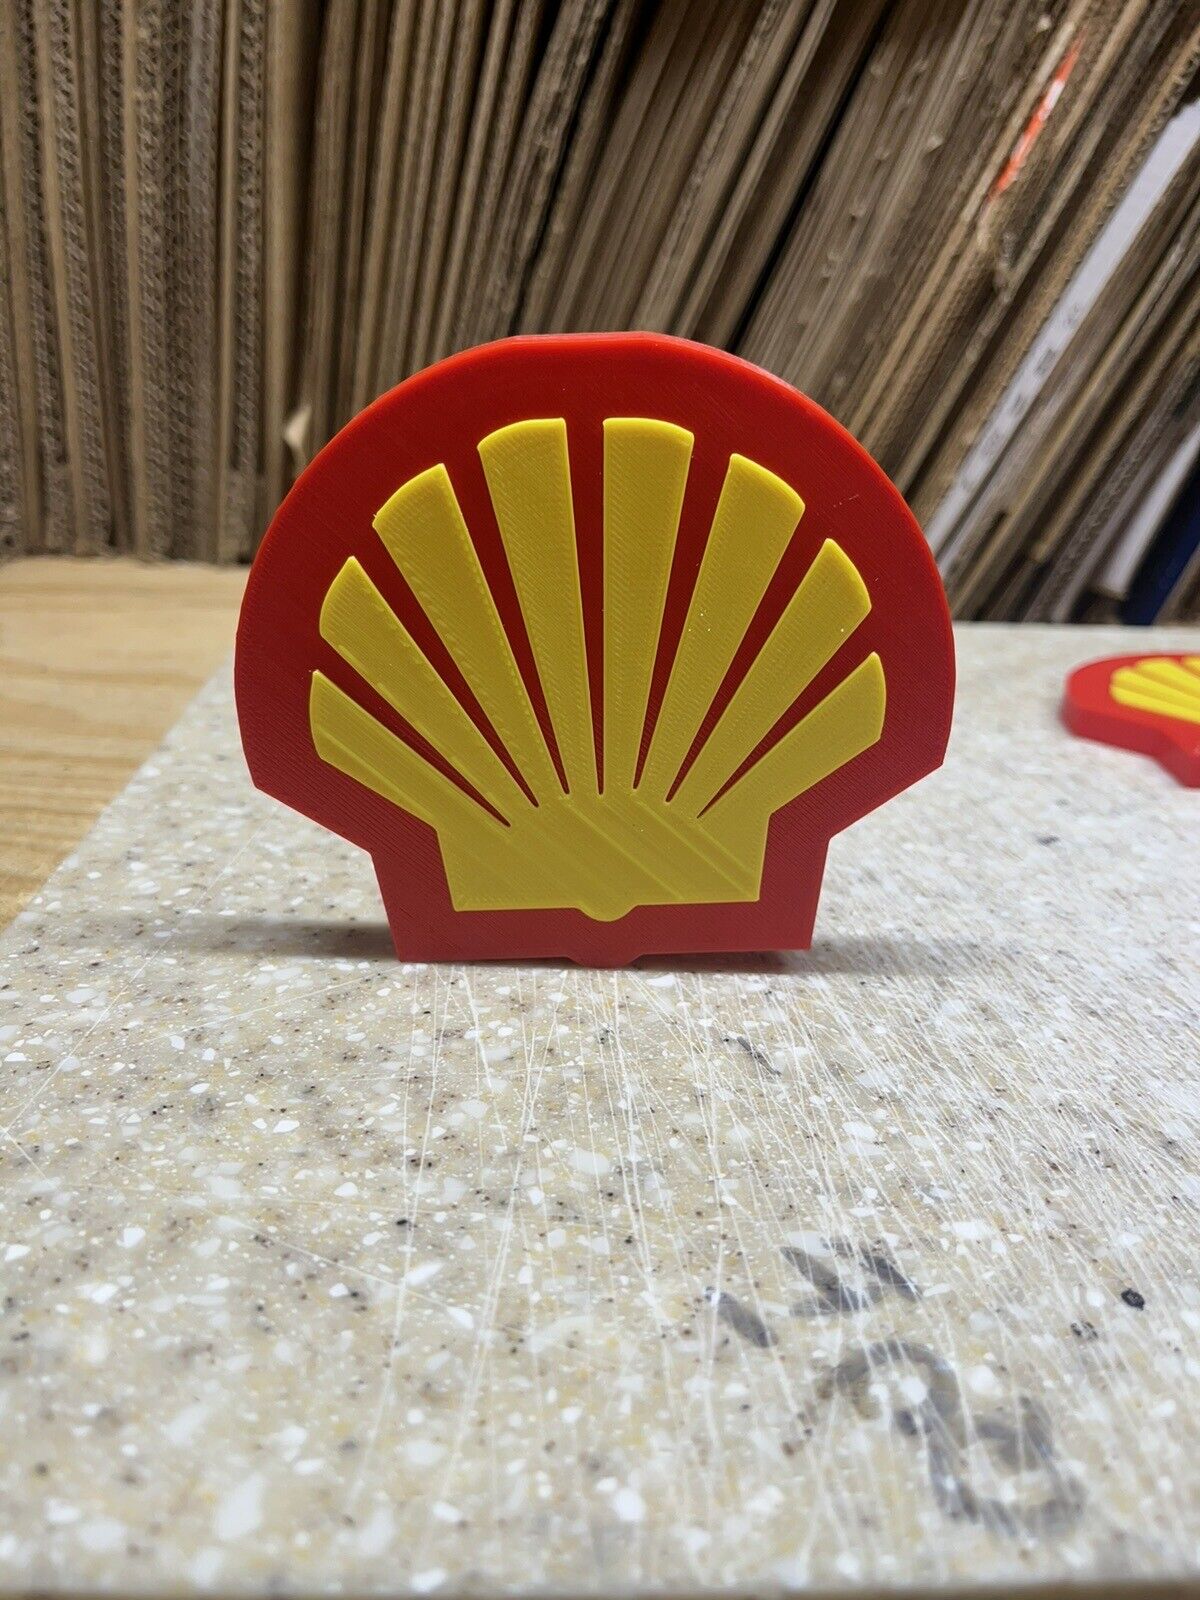 Shell gas oil sign